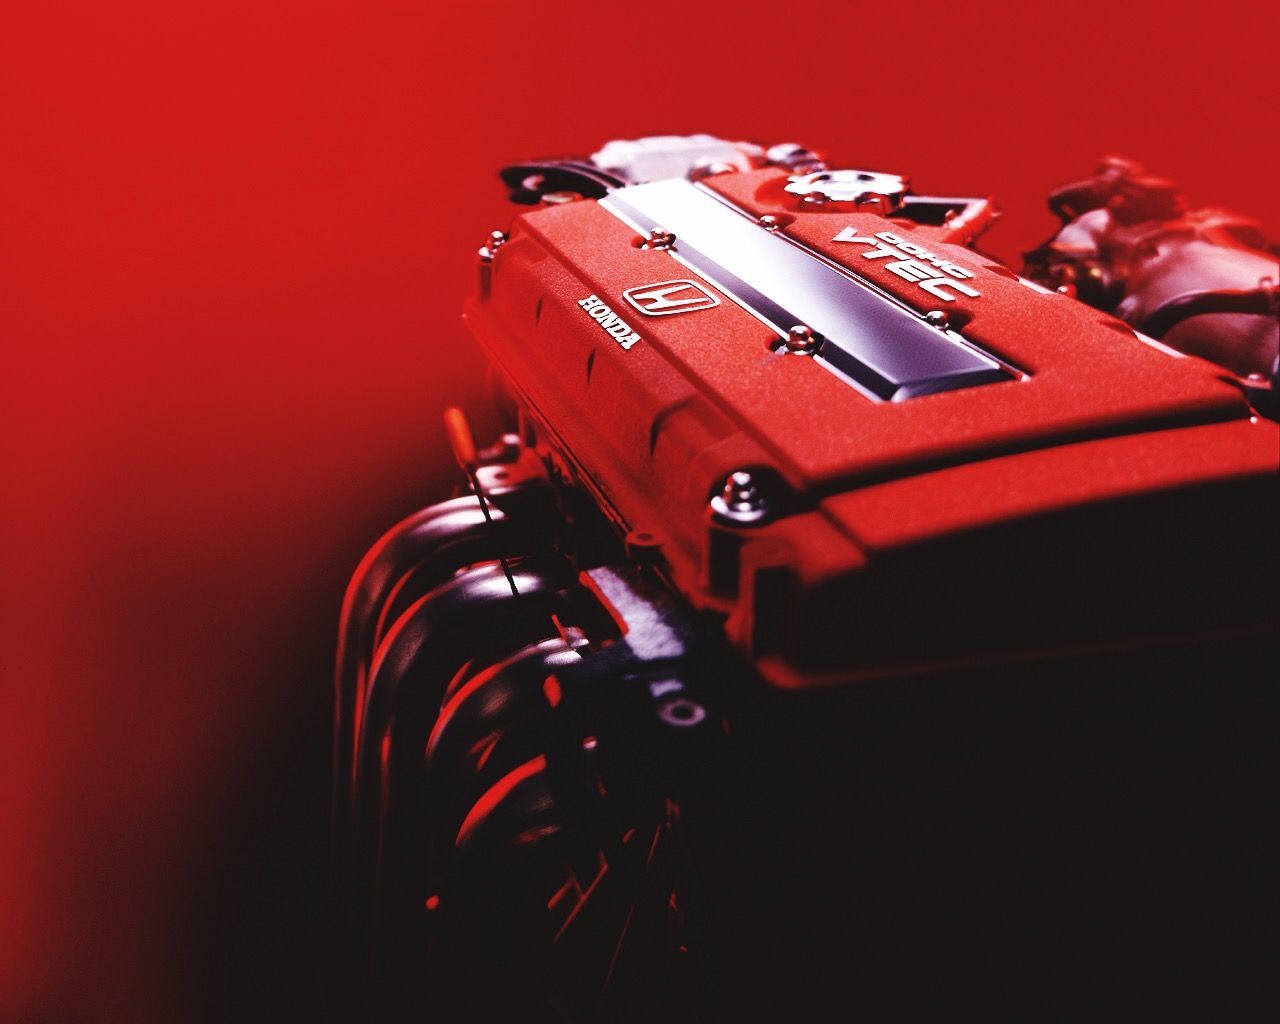 red, transportation, land vehicle, close-up, mode of transport, high angle view, indoors, still life, no people, technology, arts culture and entertainment, stationary, equipment, metal, car, selective focus, single object, part of, old-fashioned